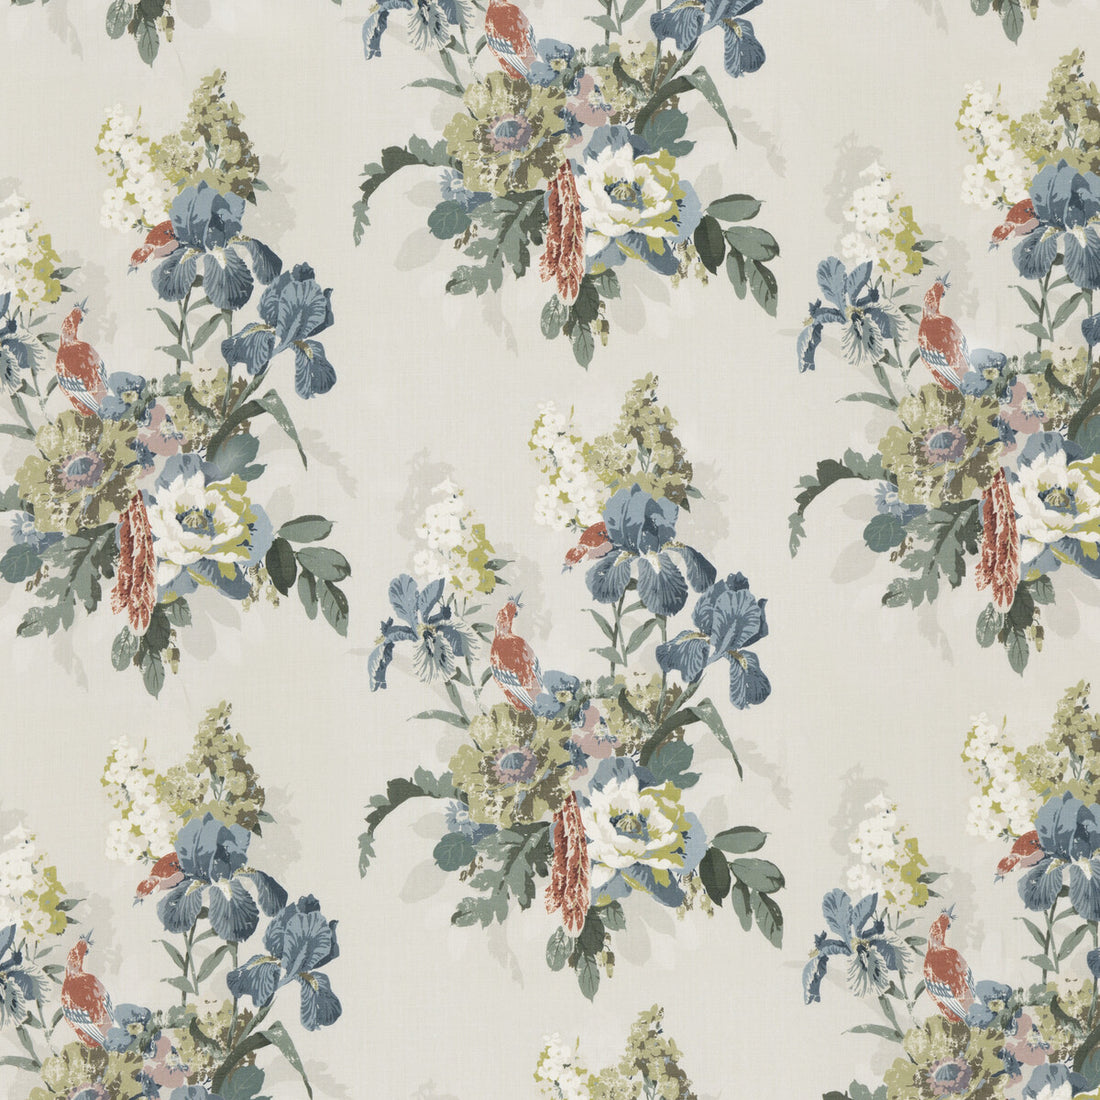 Bird &amp; Iris fabric in indigo color - pattern BP10774.2.0 - by G P &amp; J Baker in the Signature Prints collection